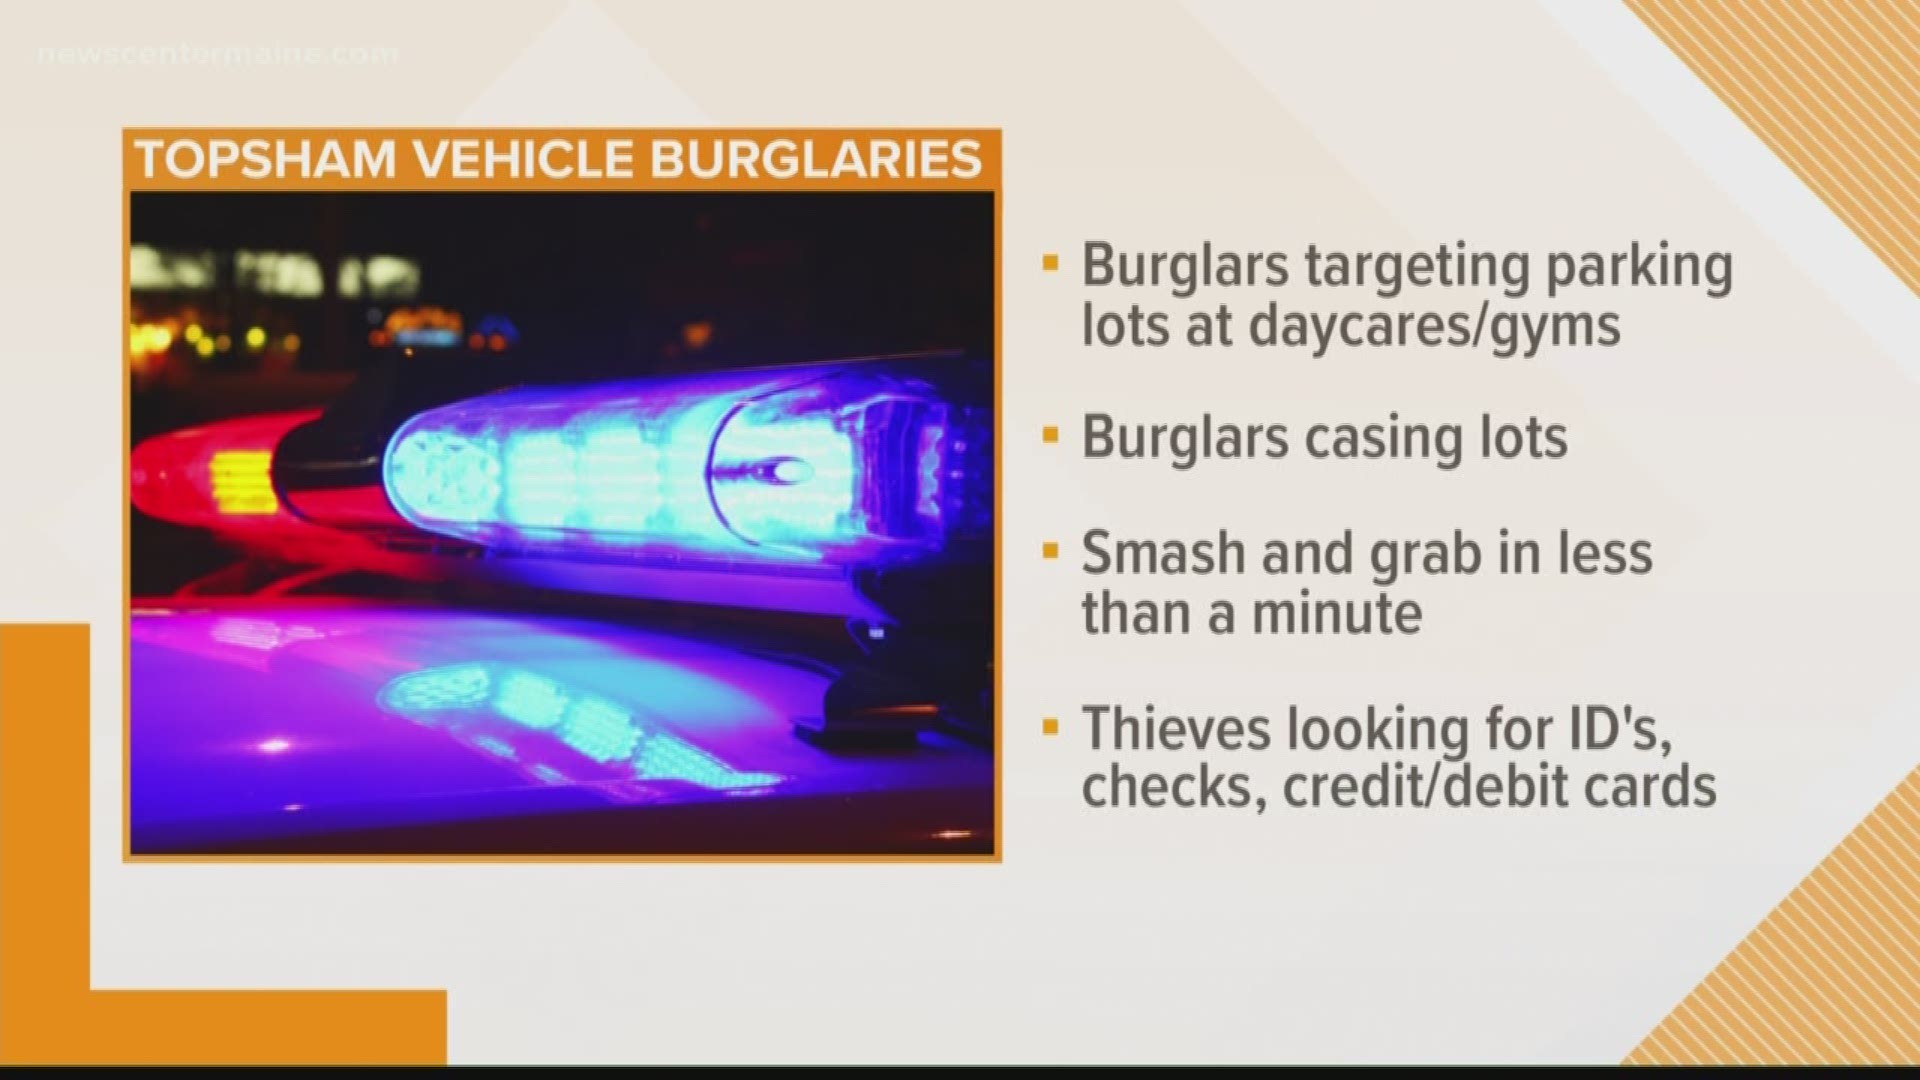 Topsham police are warning people to lock their vehicles and take their valuables with them after a rash of burglaries in the area.